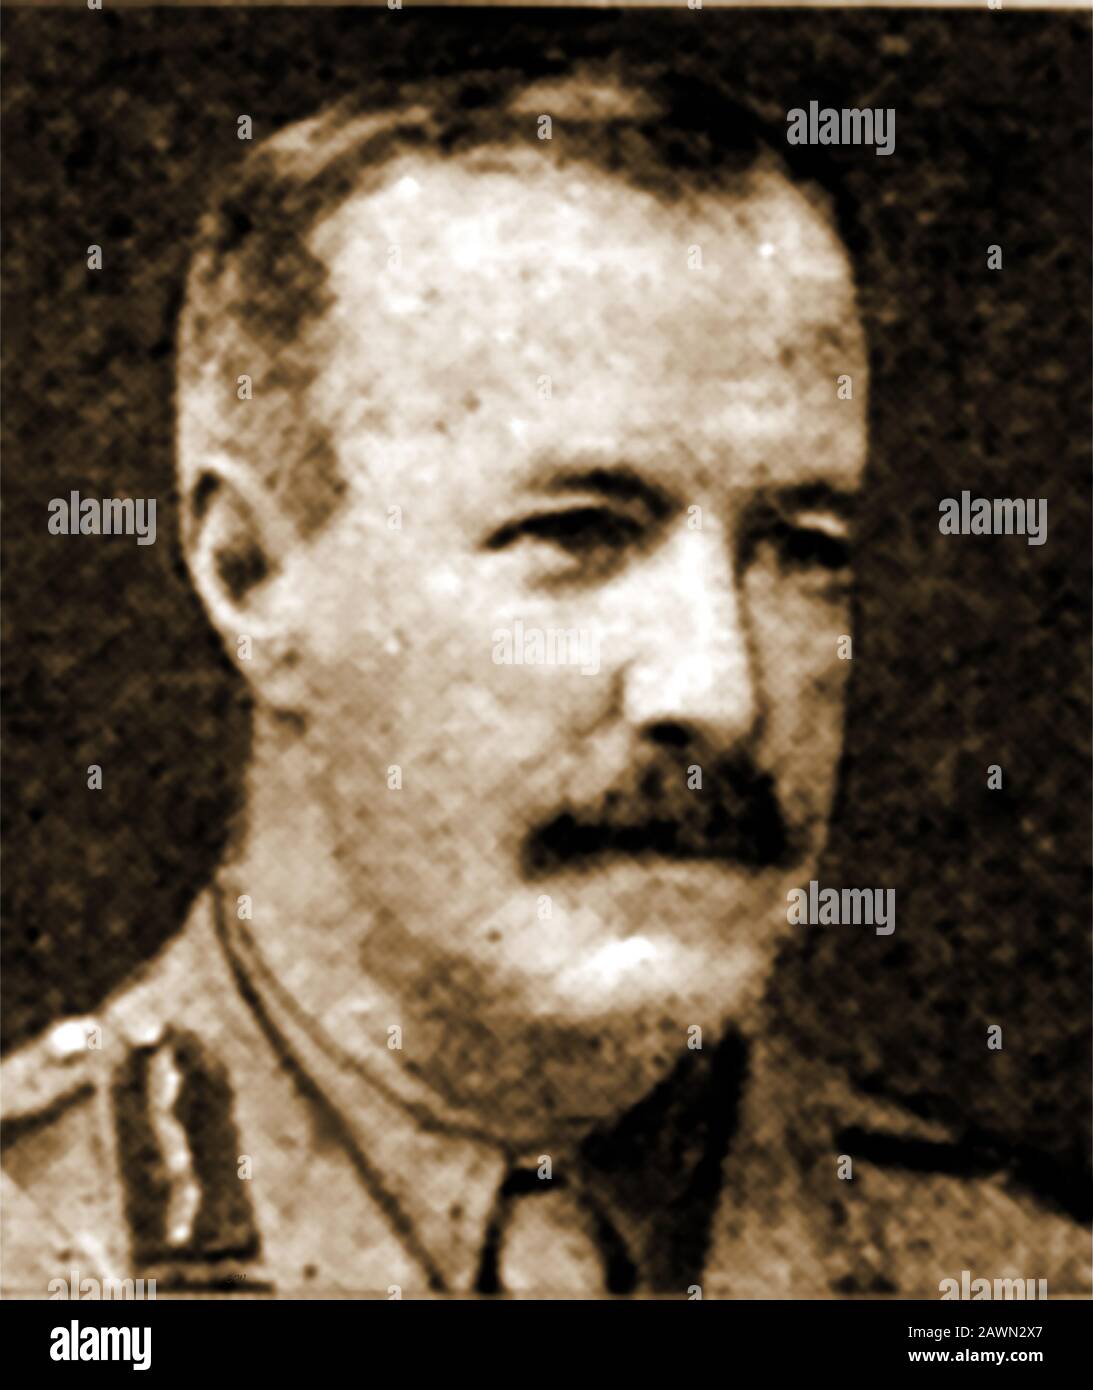 A portrait of  Scottish born WWI Brigadier General John Charteris CMG DSO (1877–1946) who served as  Chief of Intelligence  &  disinformation at the British Expeditionary Force General Head Quarters  (in charge of propaganda) and Unionist member of parliament for Dumfries, Scotland . His biggest hoax of WWI was that Germany rendered down the bodies of their own soldiers at a Kadaververwertungsanstalt, factory. Stock Photo